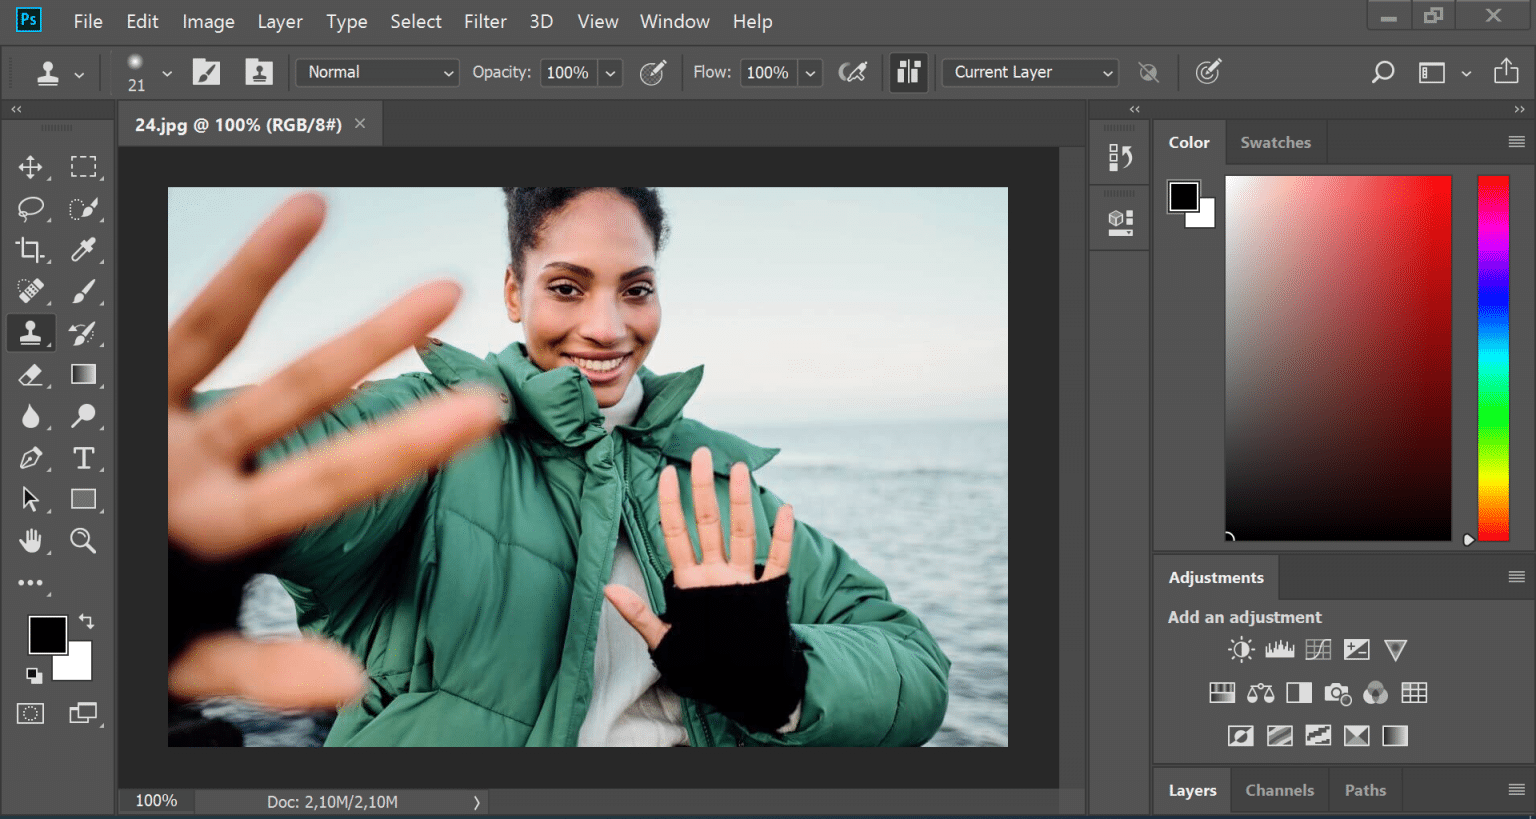 easest way to remove watermark from a photo using photoshop